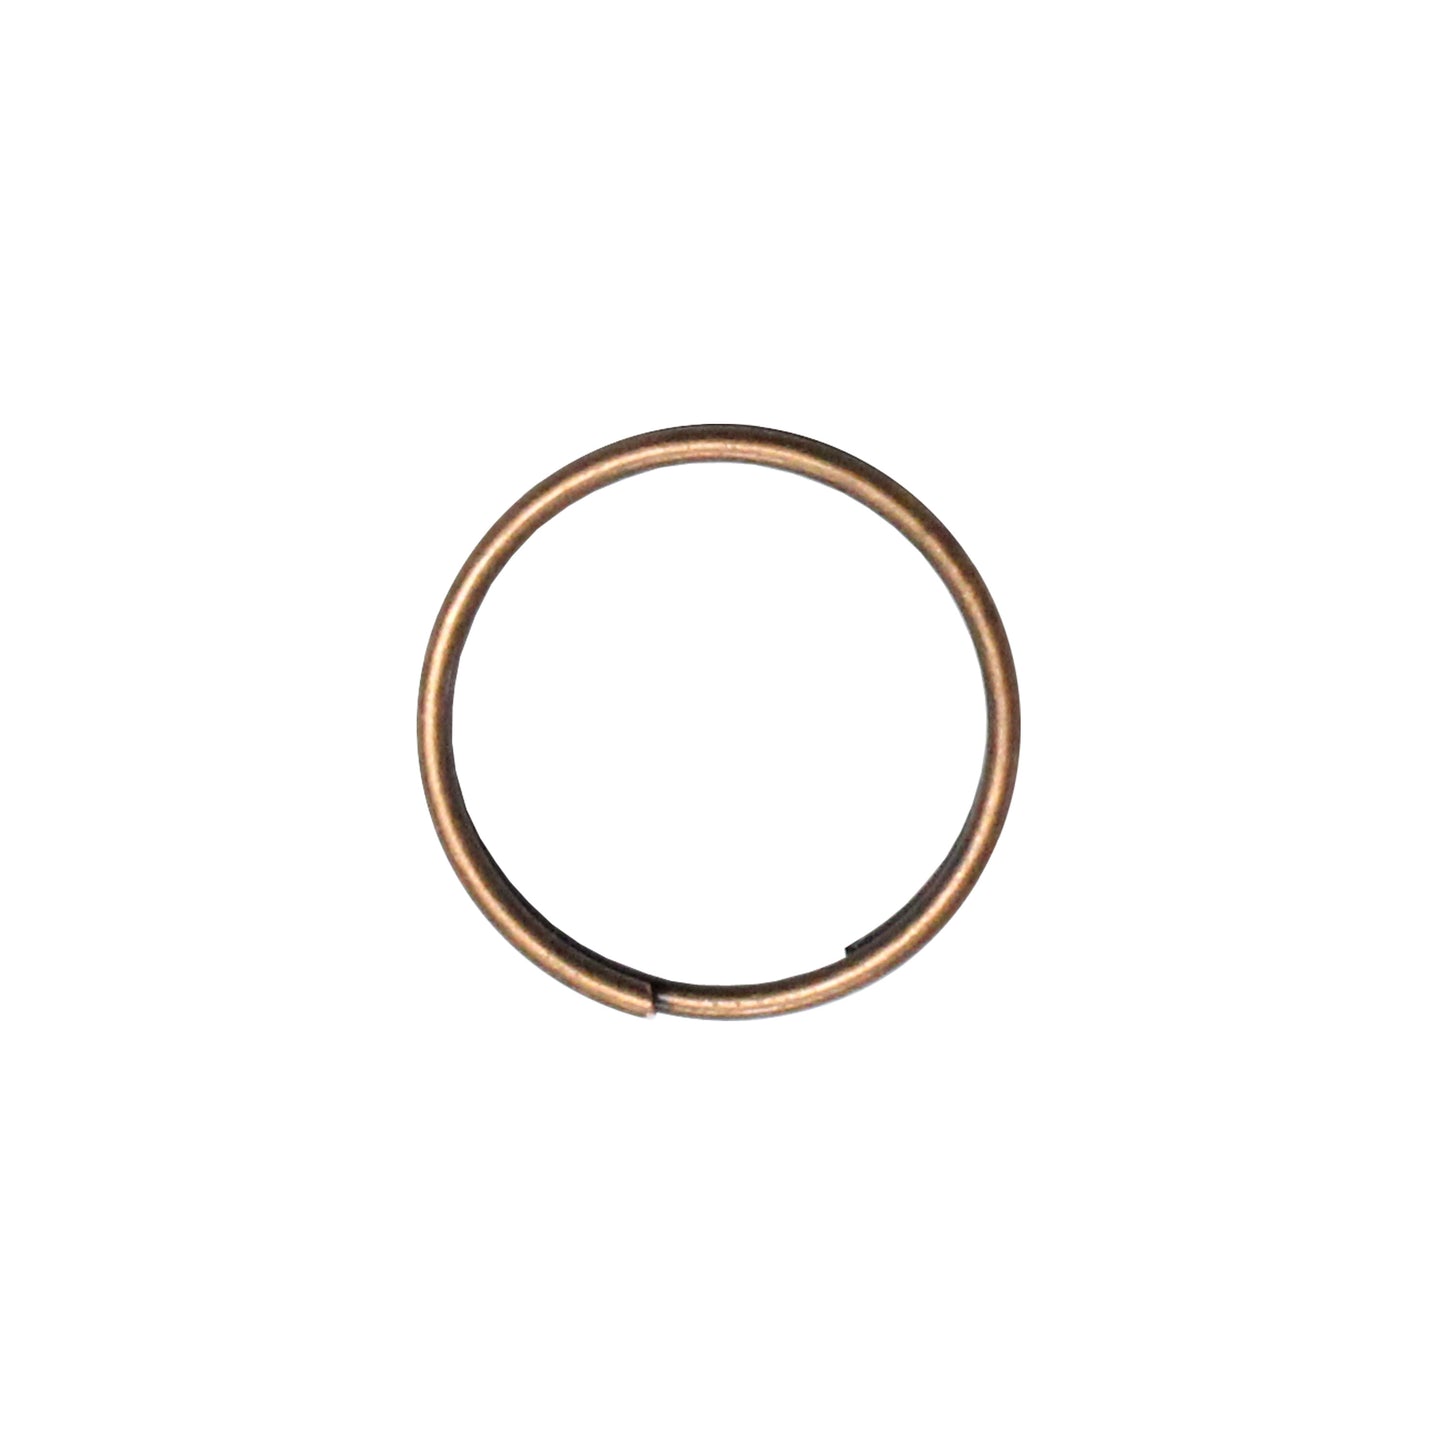 20mm Antique Copper Split Ring / 10 Pack / for key rings or secure charms or tags